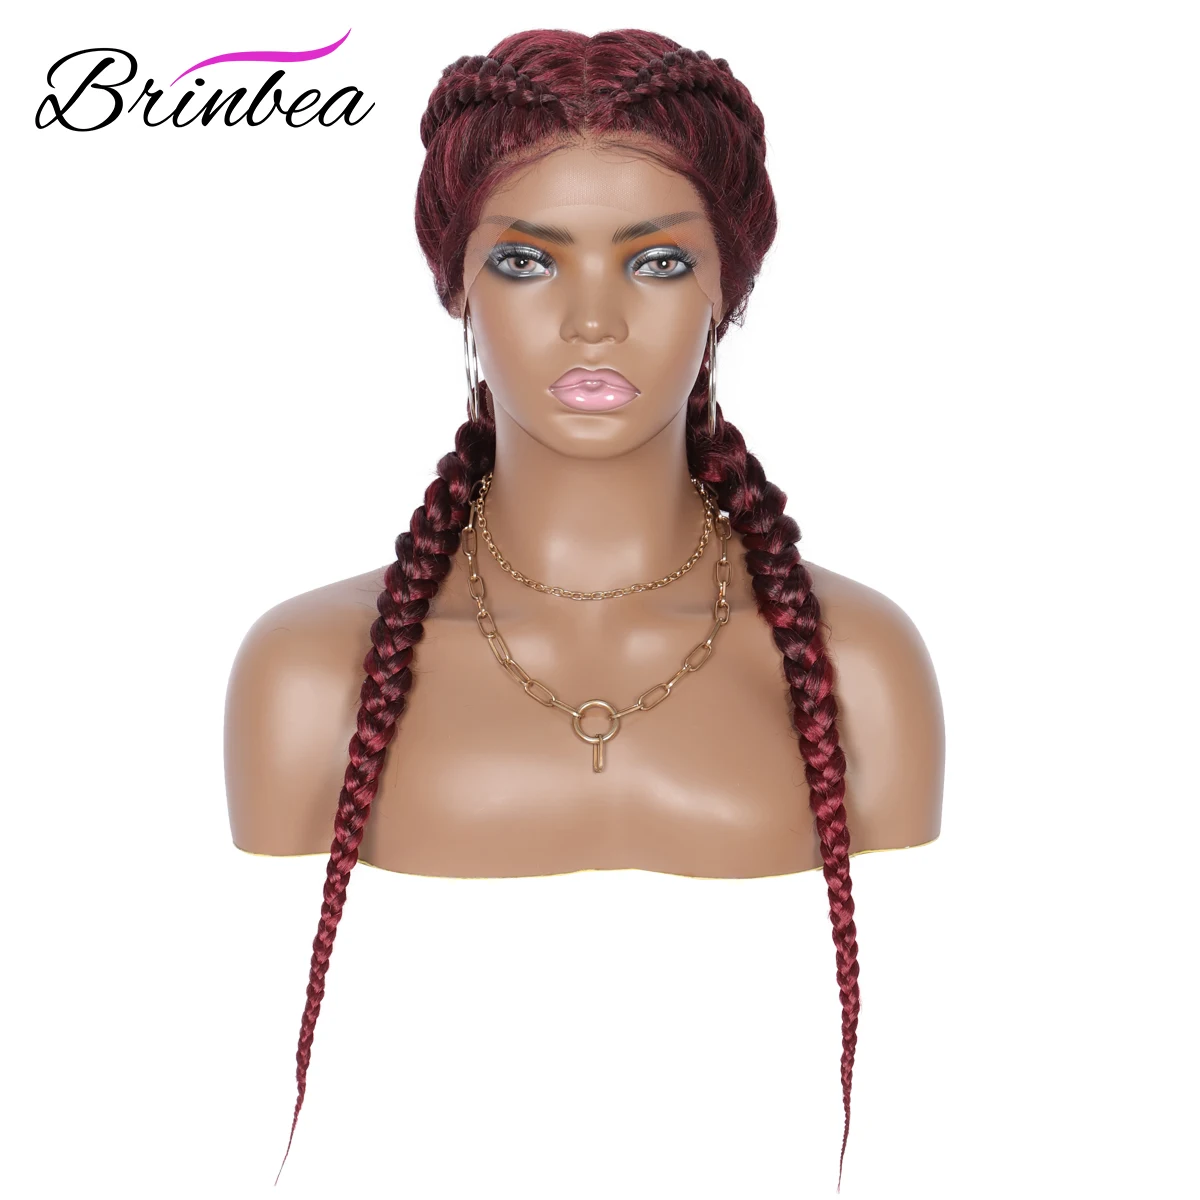 

Brinbea 24” Synthetic Lace Front Wigs Afro Box Dutch Braiding With Baby Hair Braided Braids Wig Braids Hair Wig For Black Women